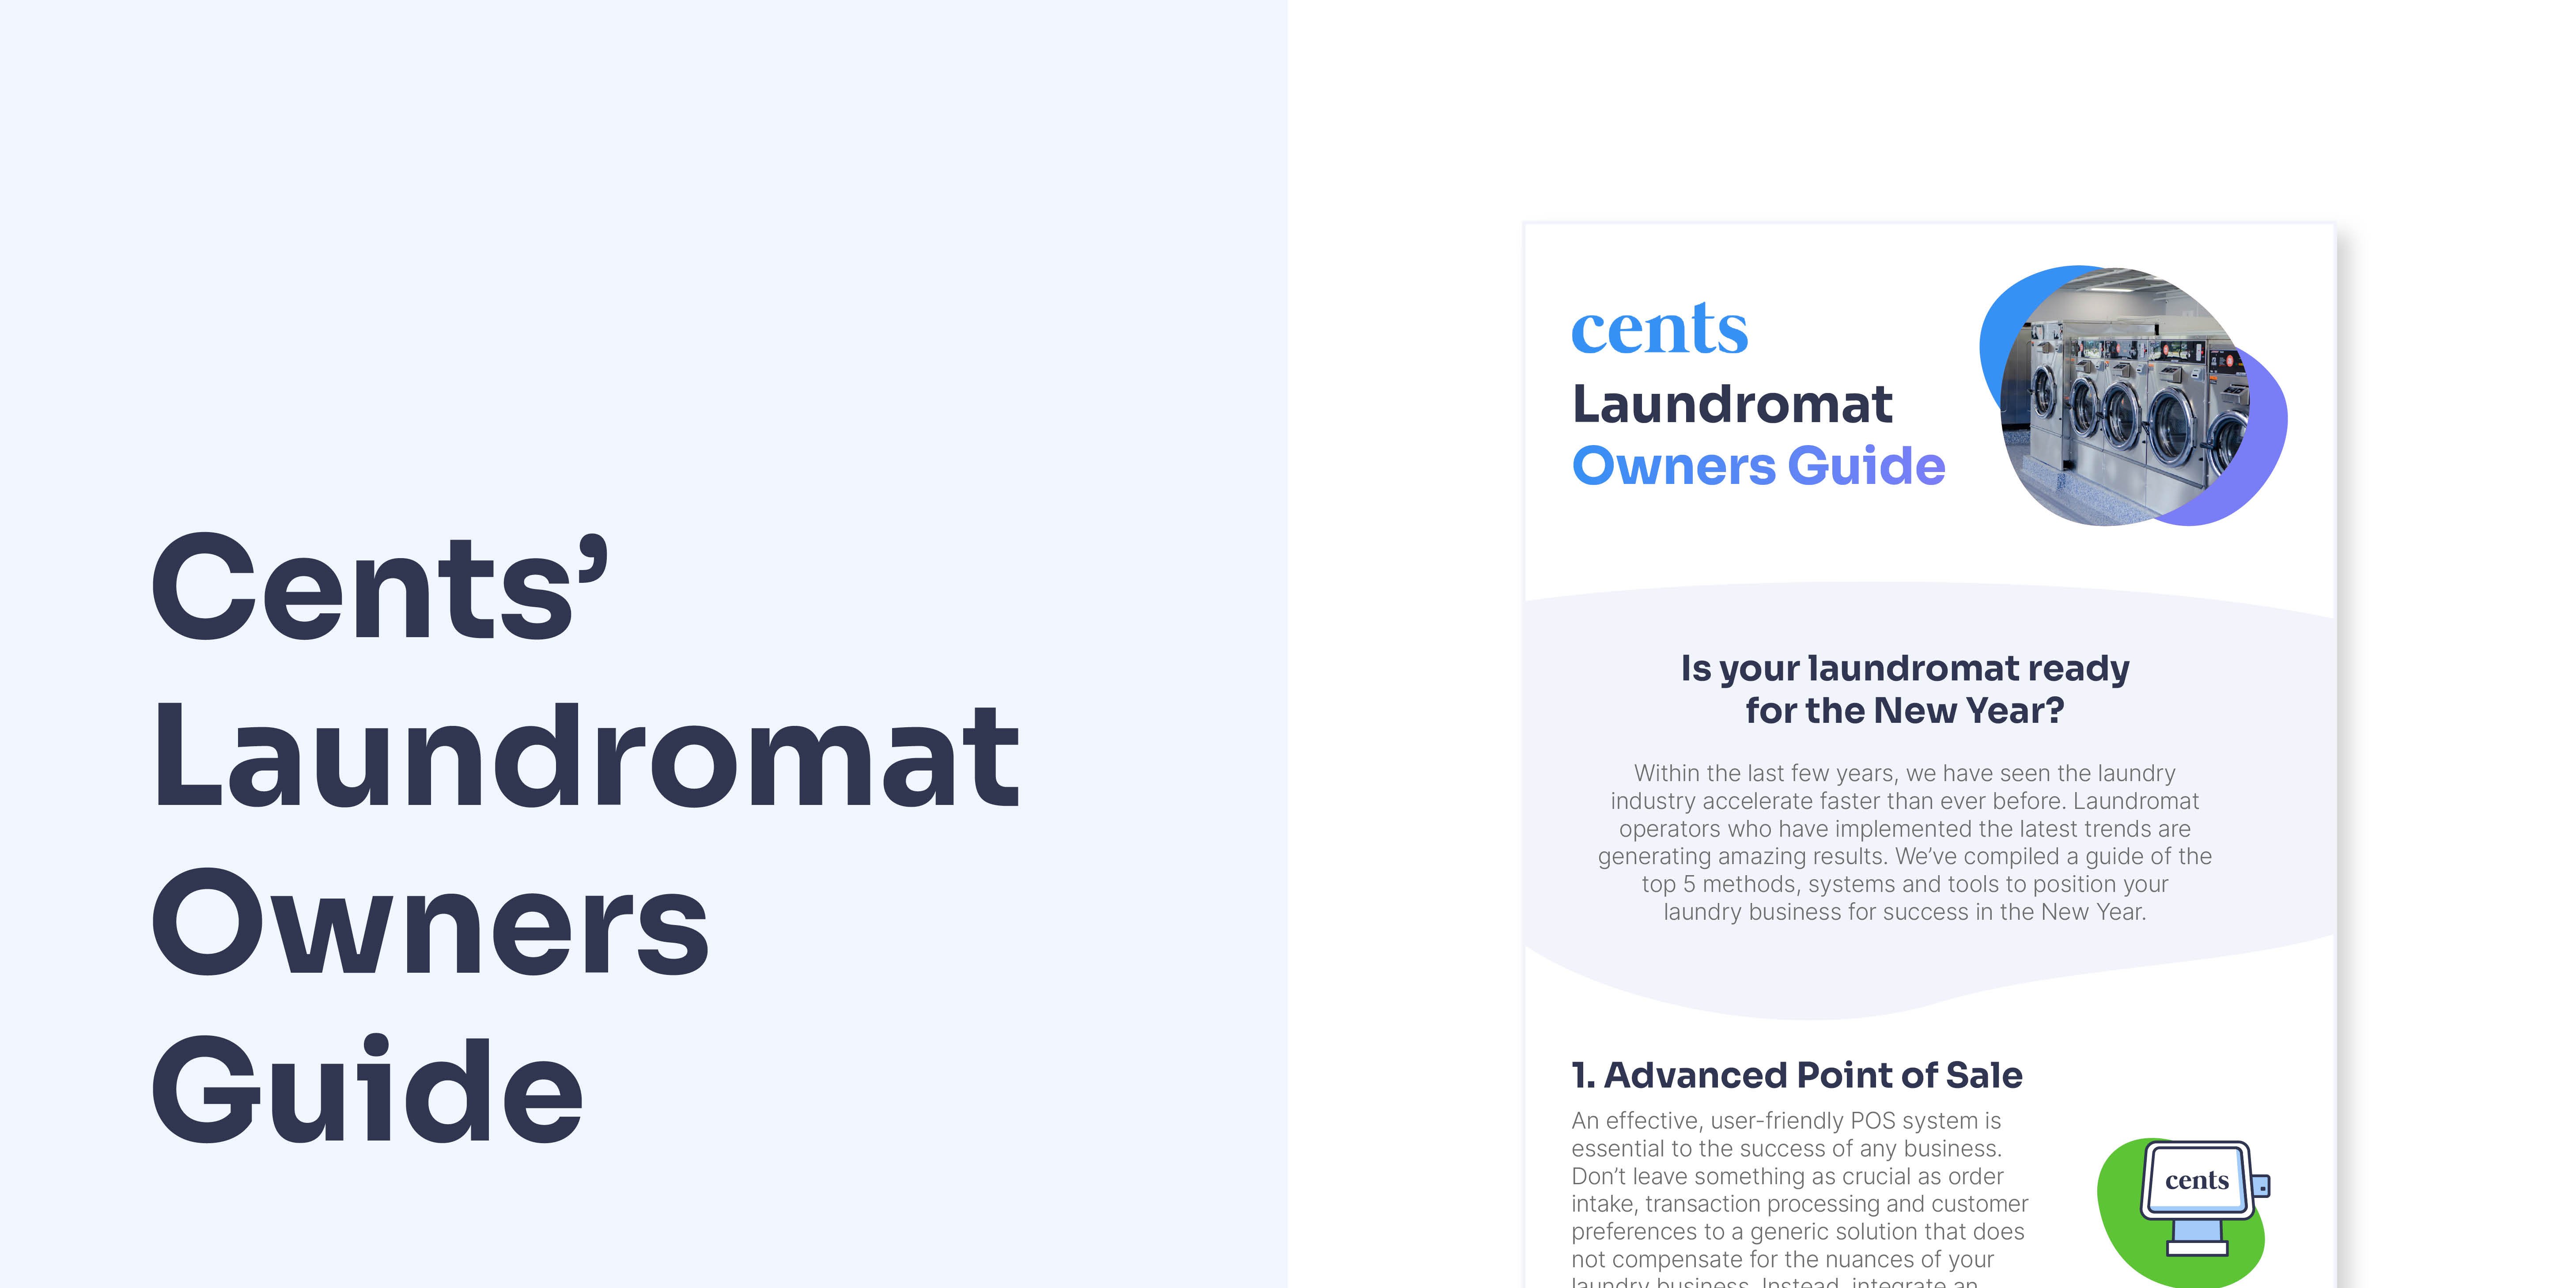 Laundromat Owners Guide